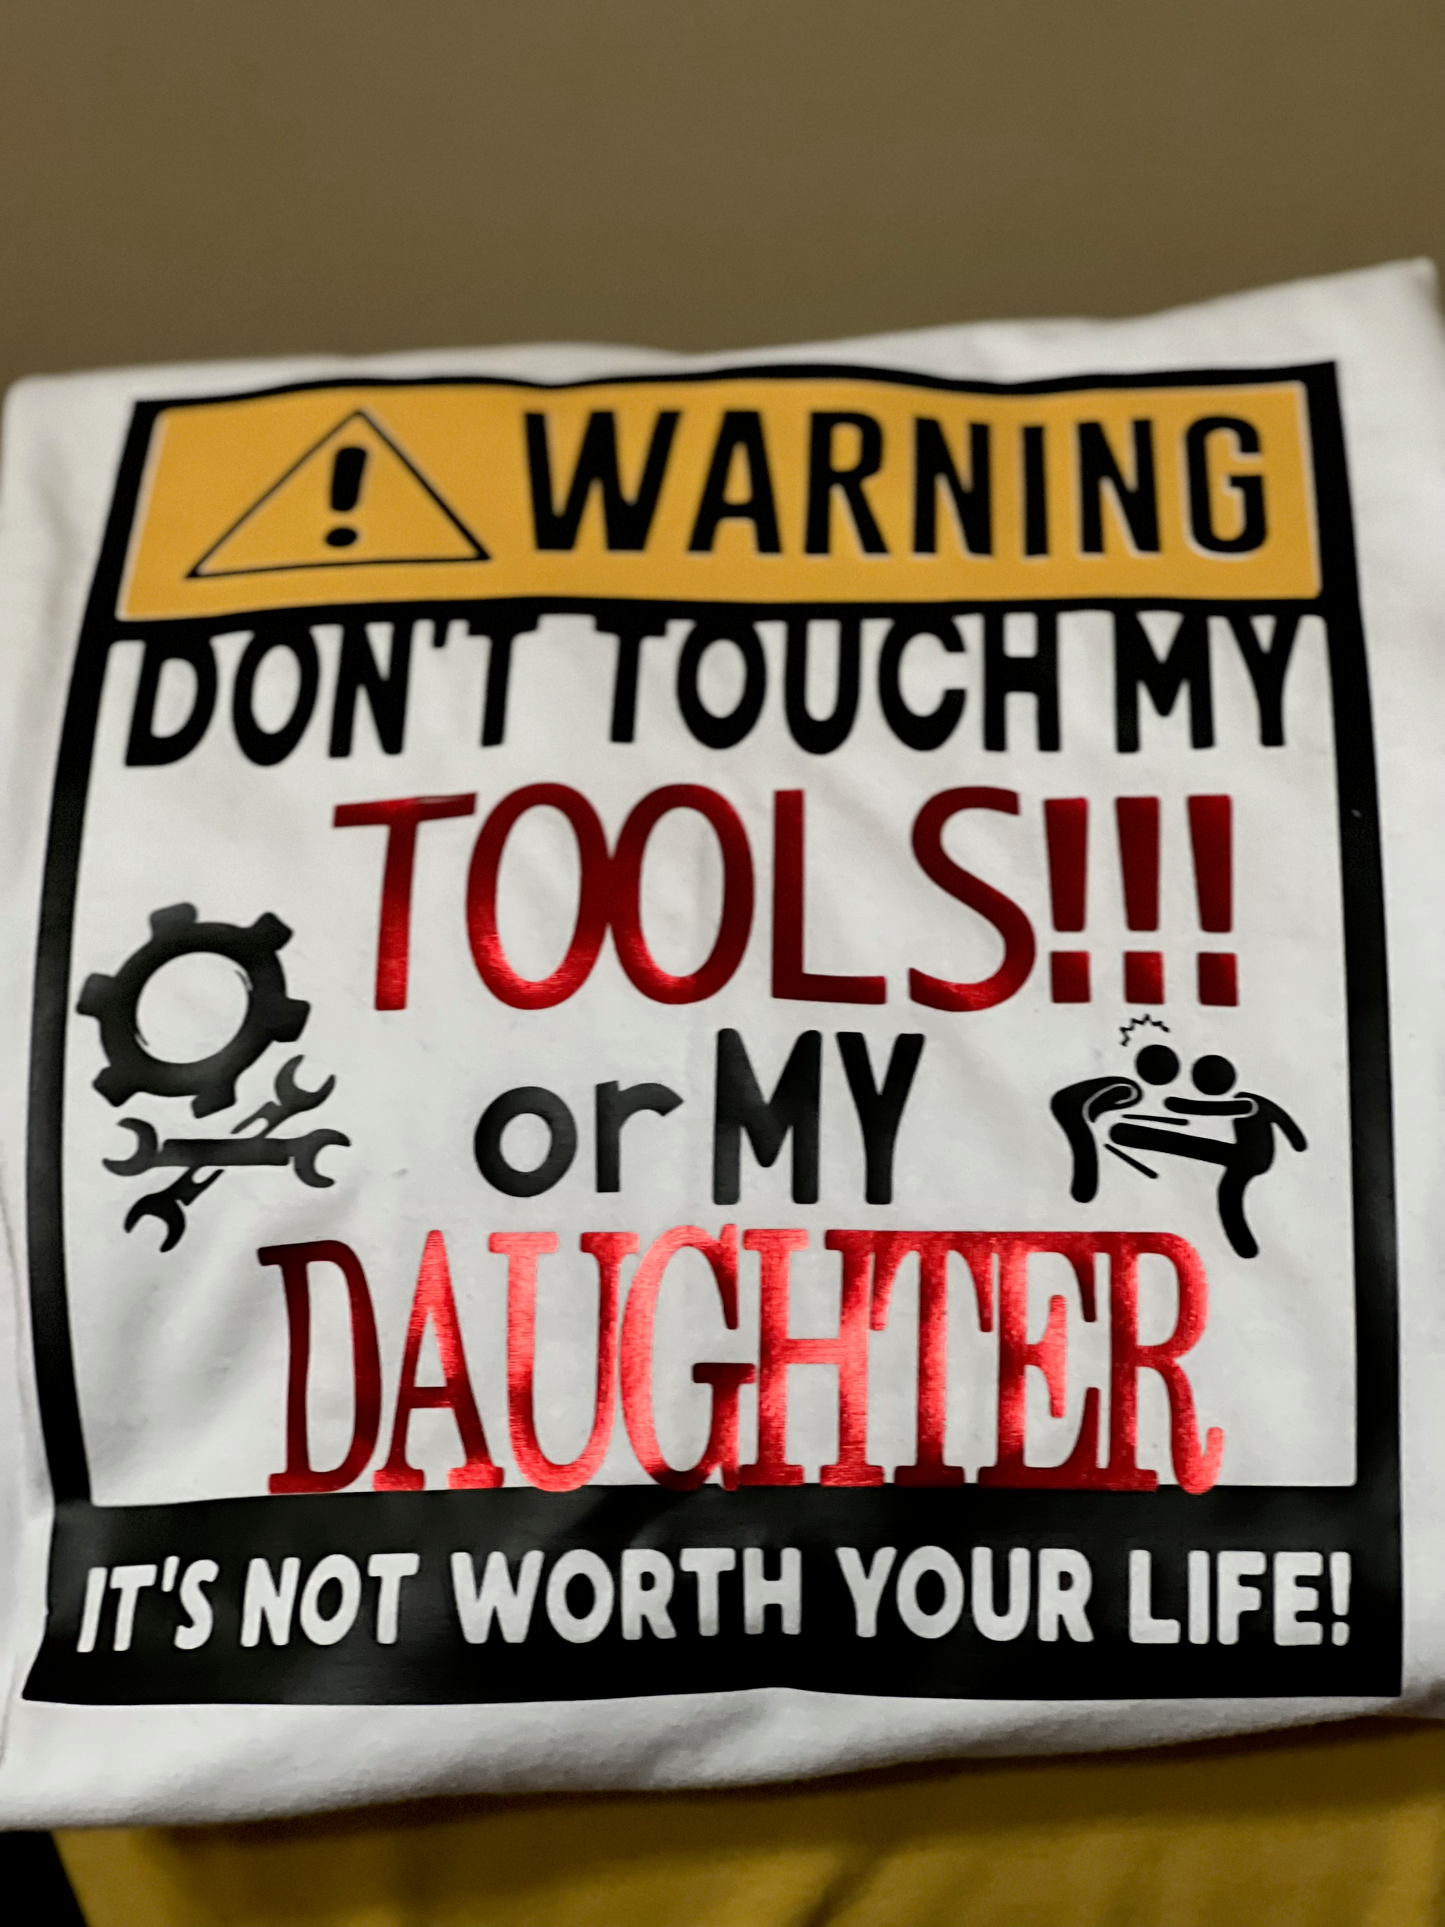 Warning! Hands off my daughter!